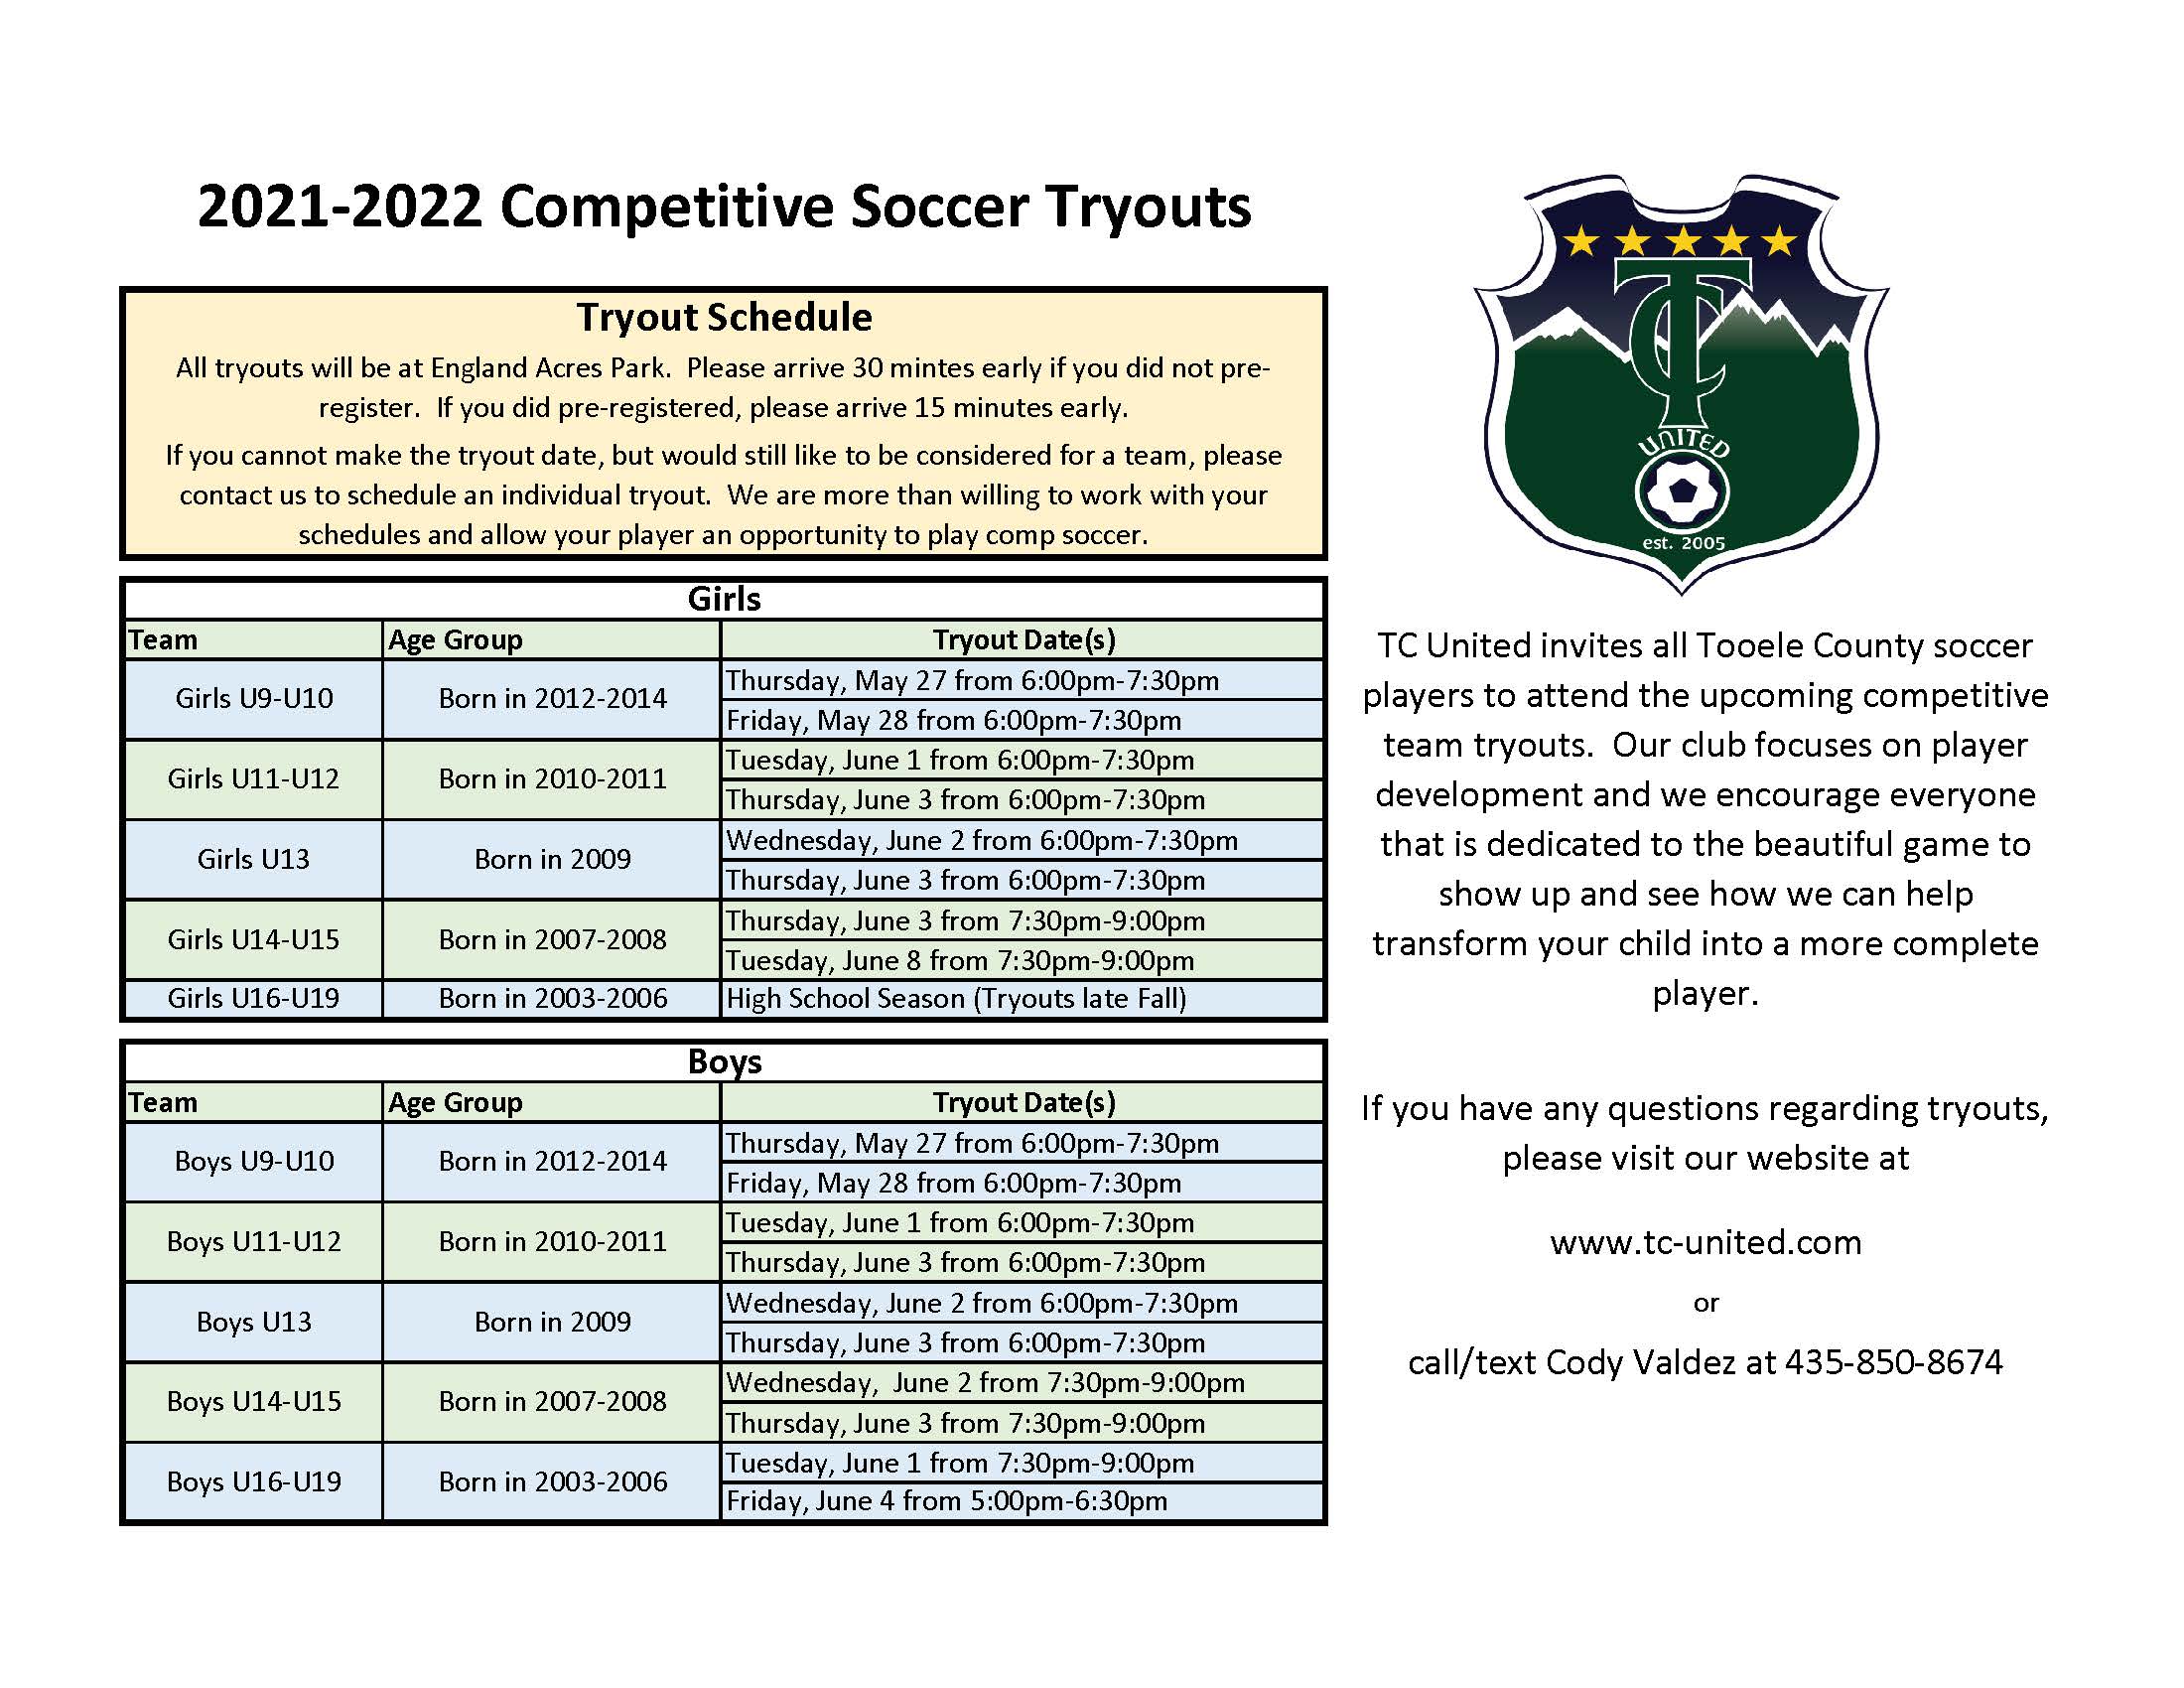 Tryout Schedule 2021